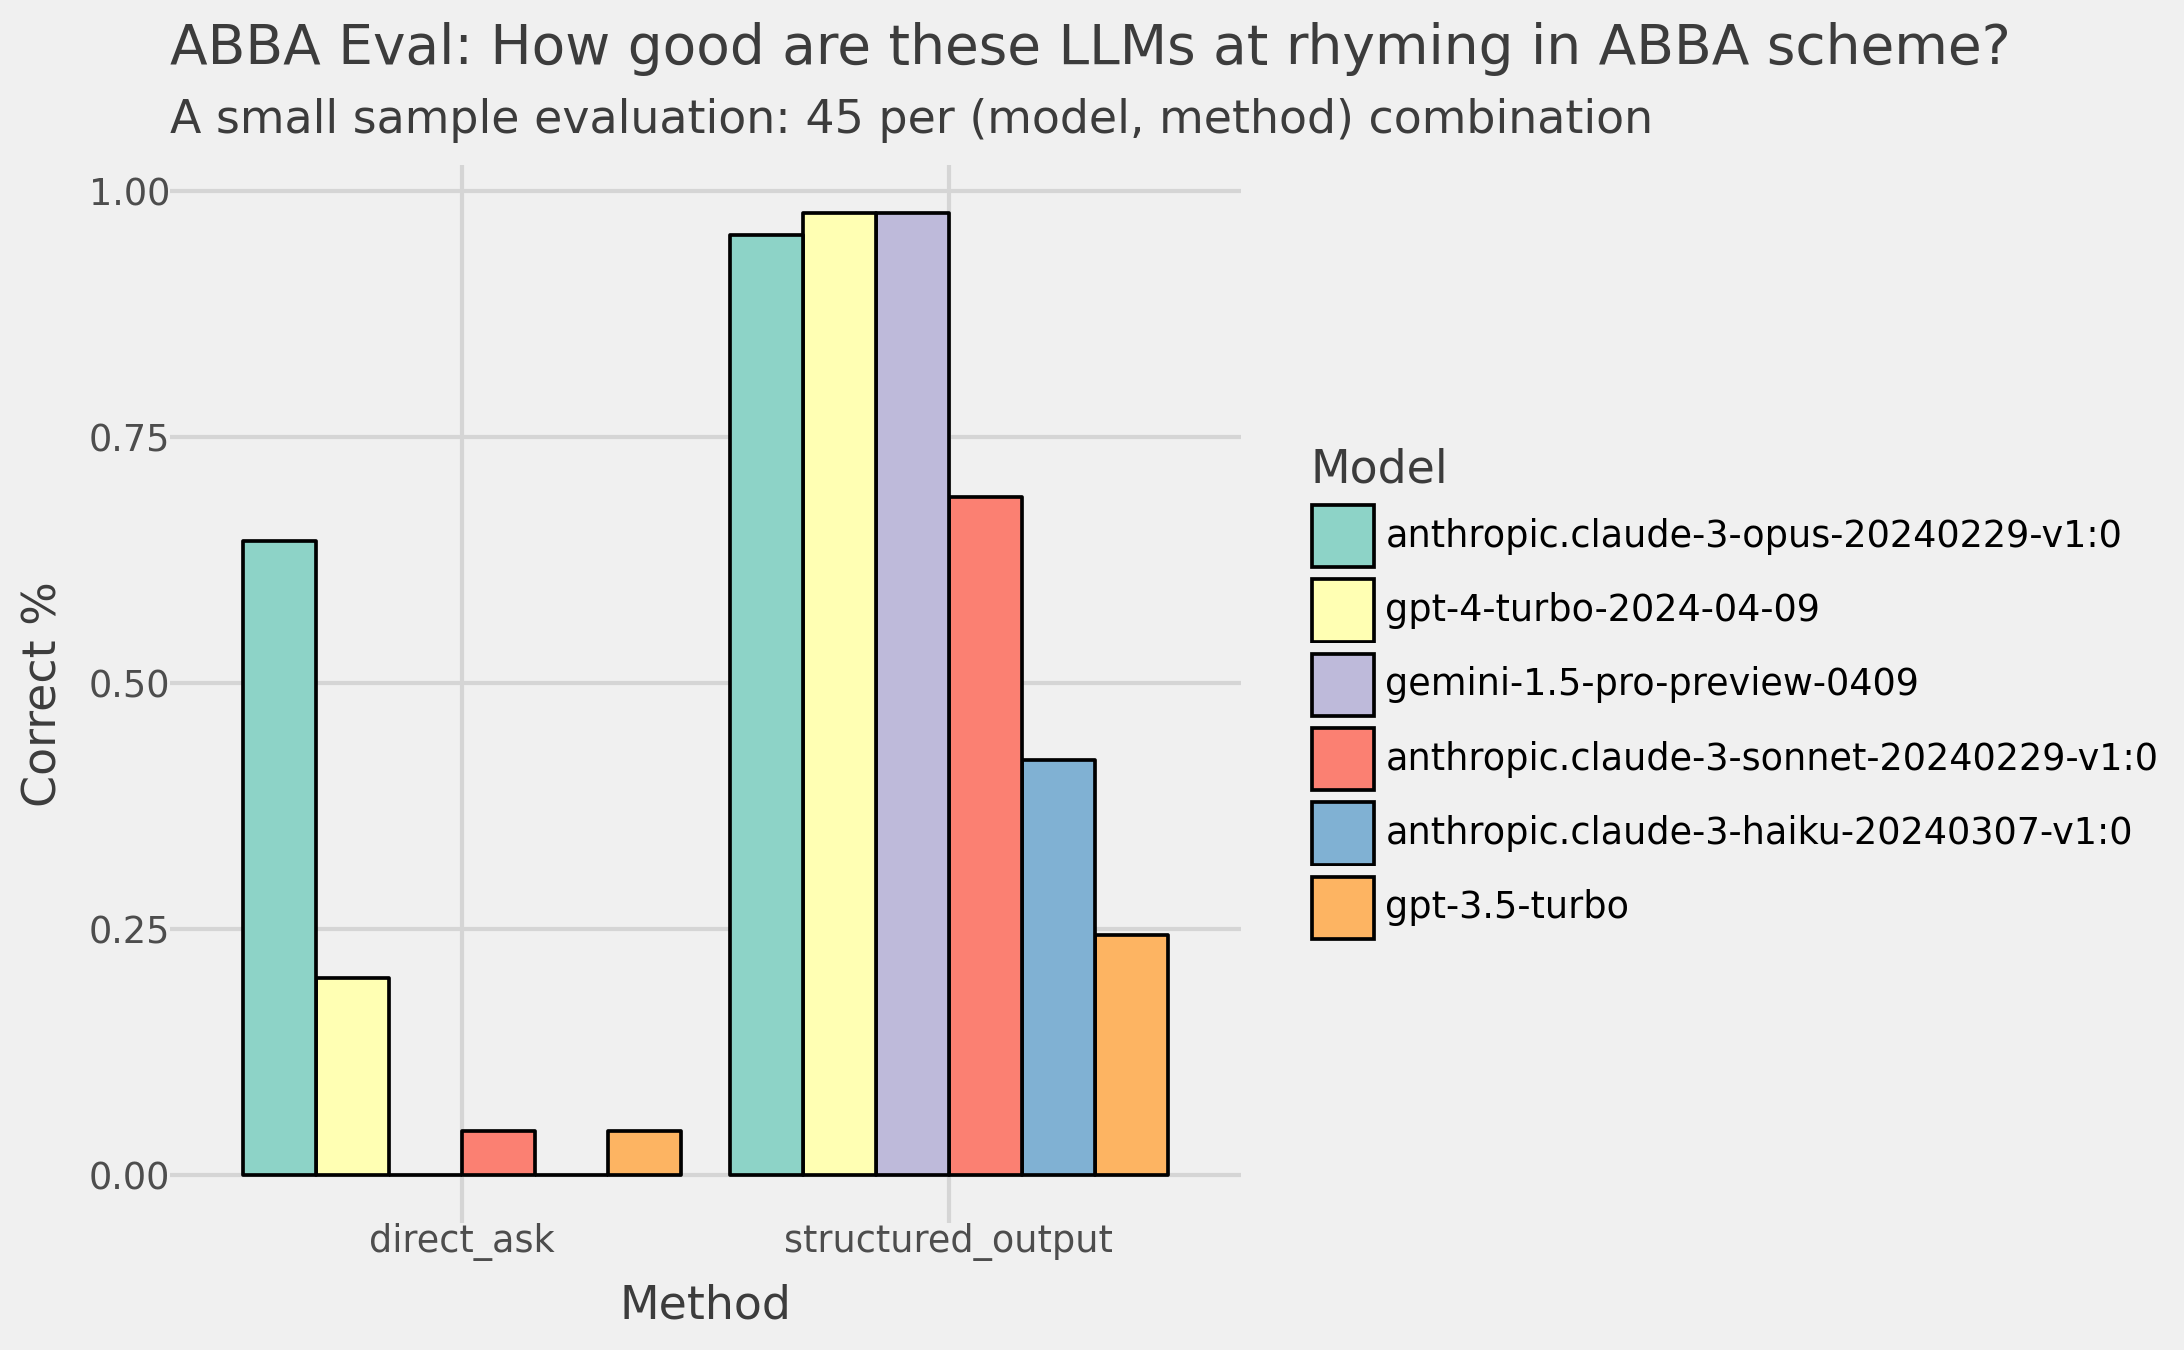 Results of LLMs on ABBA rhyming task